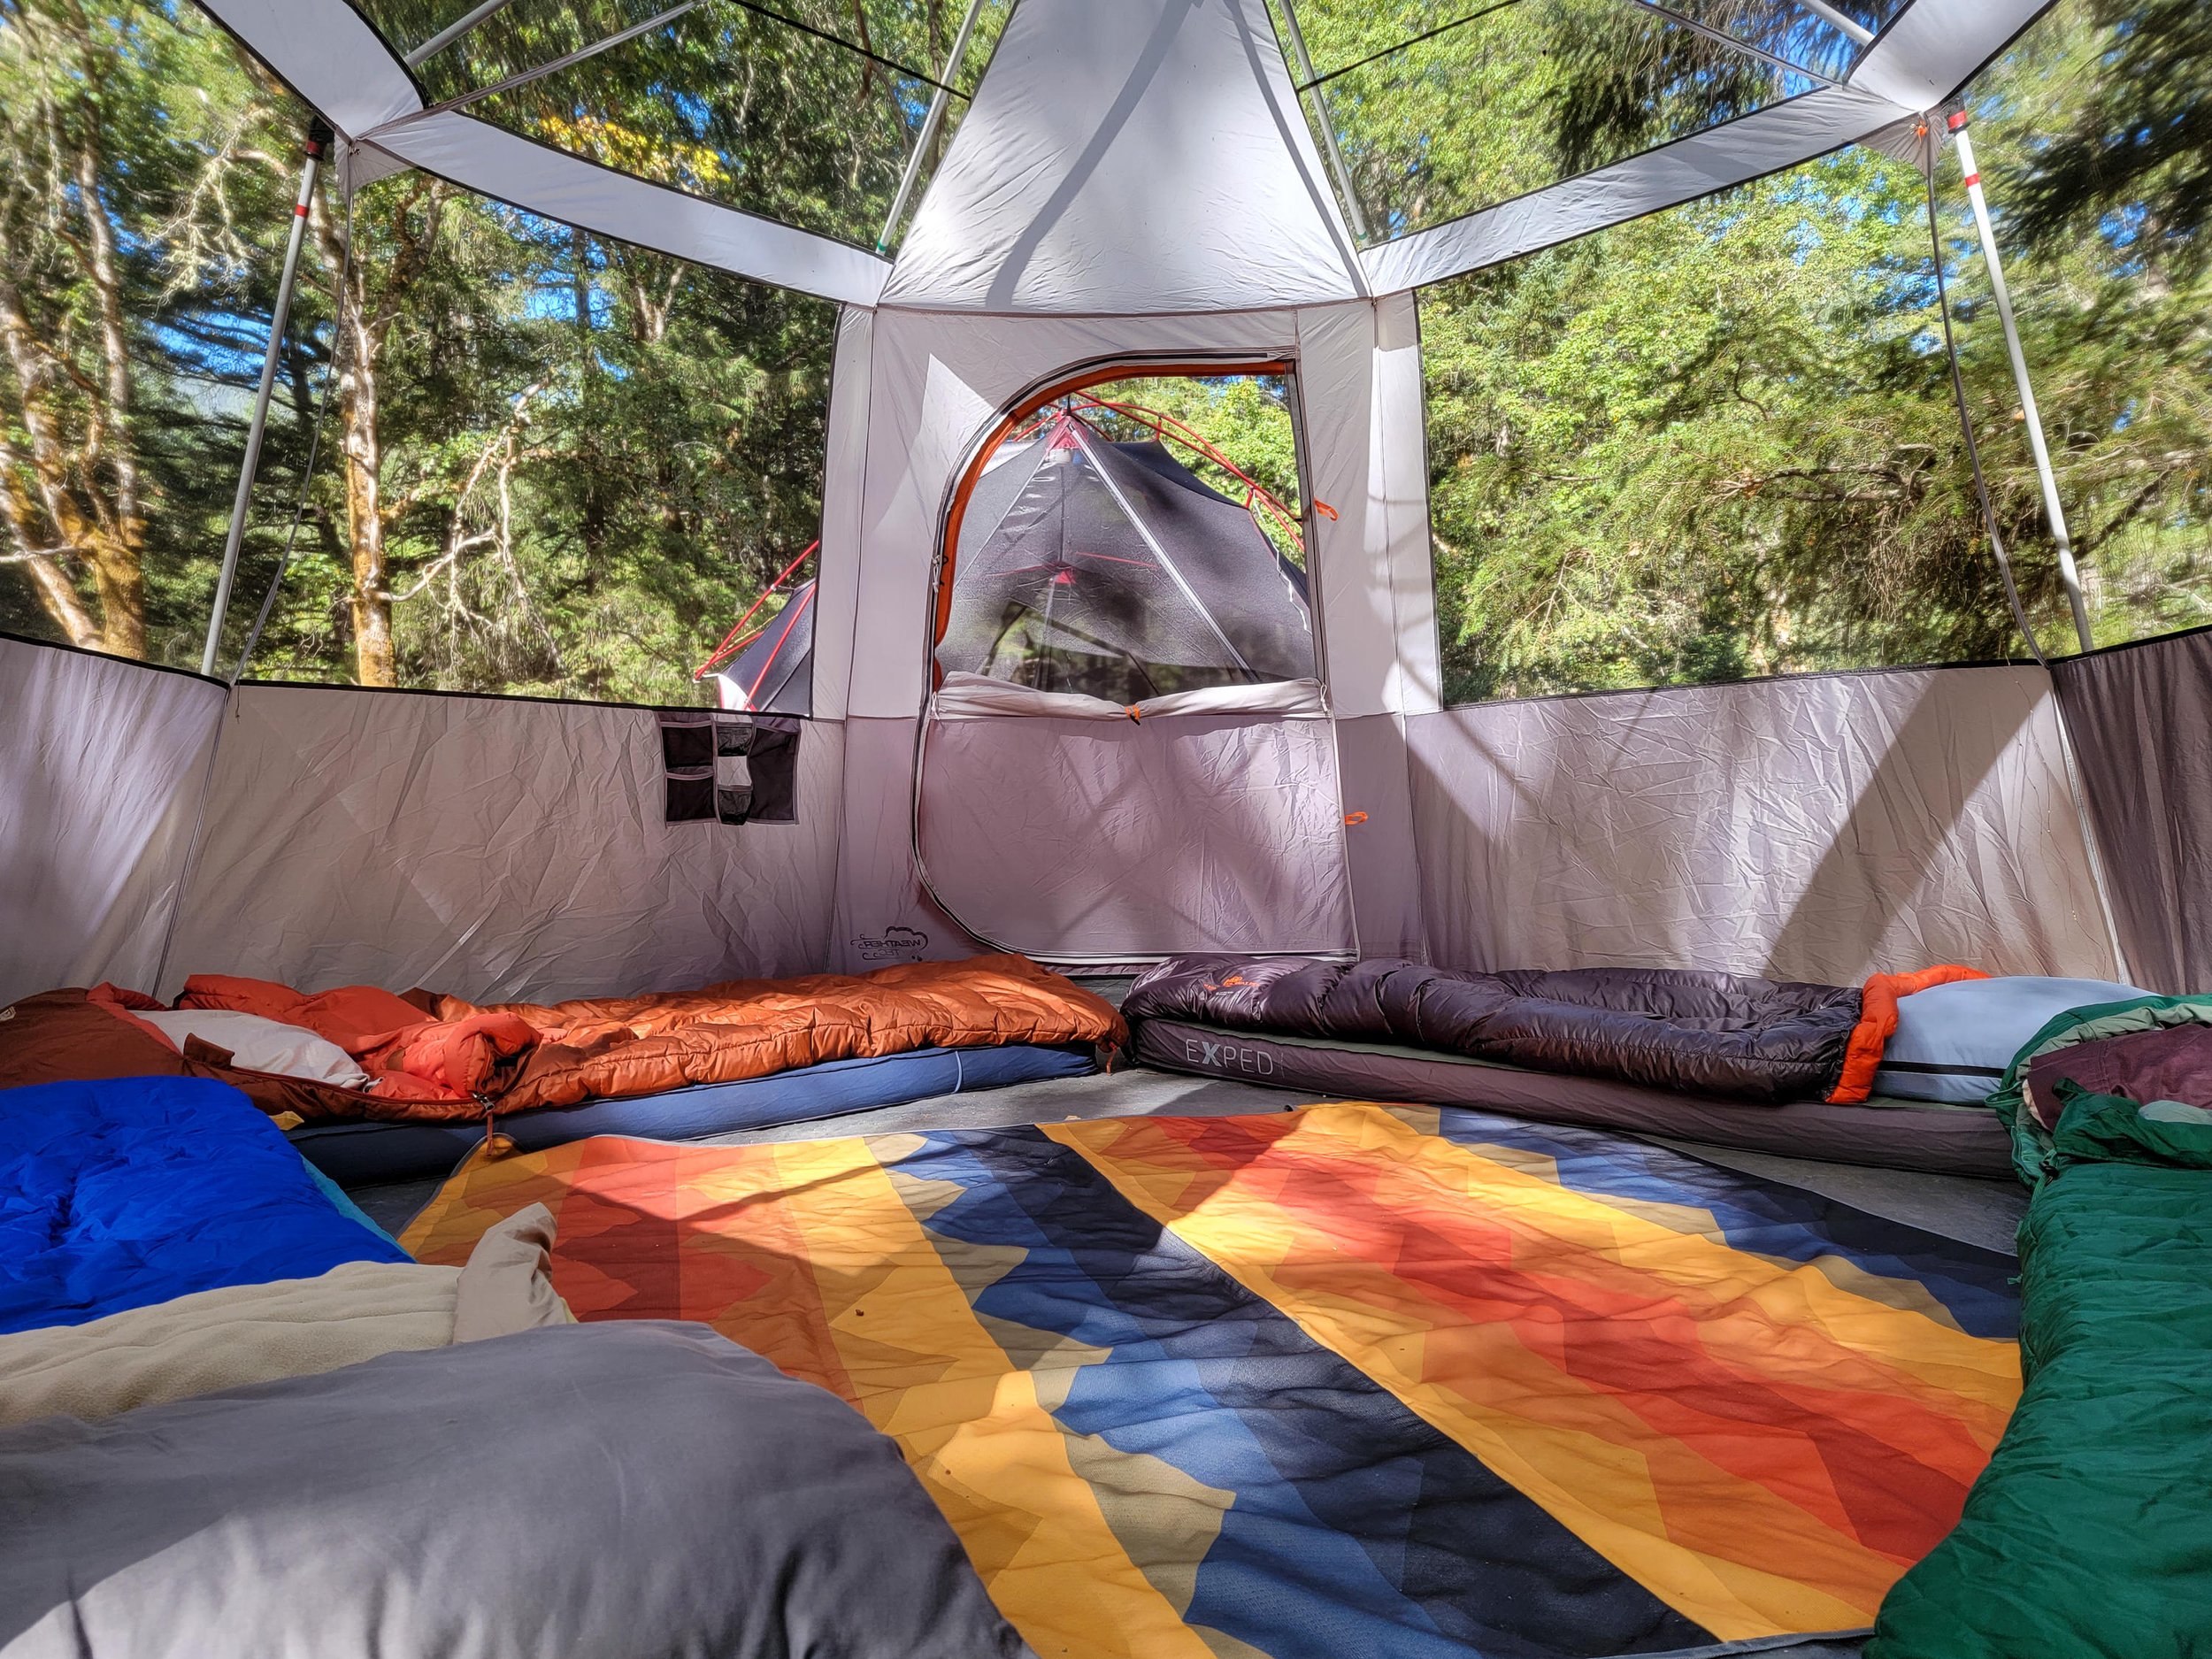 Sleeping bags in a tent